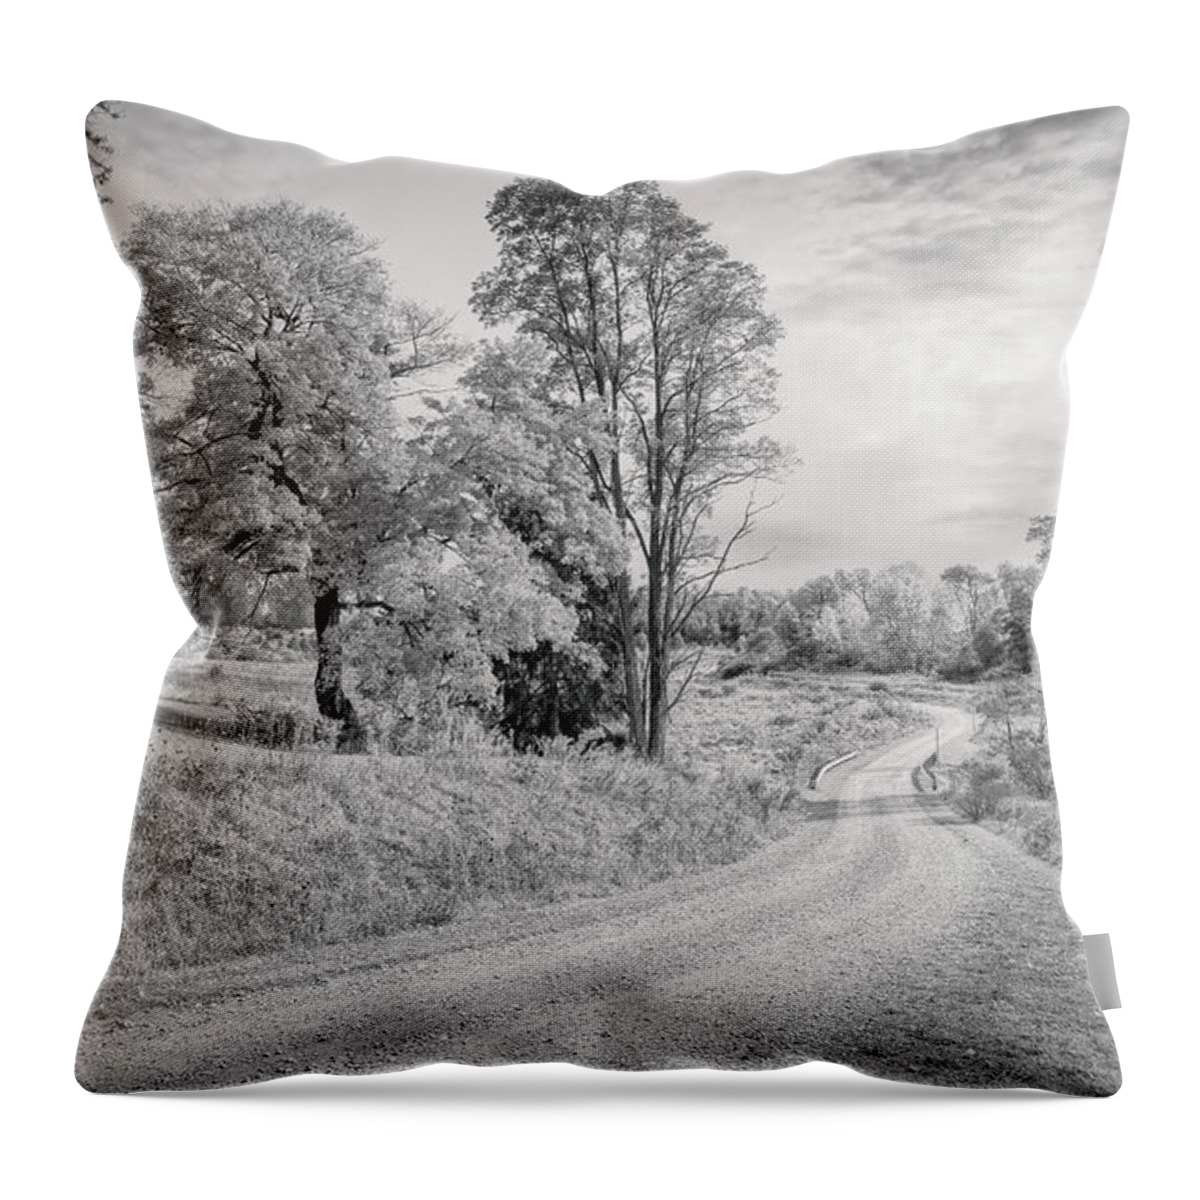 Landscape Throw Pillow featuring the photograph Country Road by John M Bailey